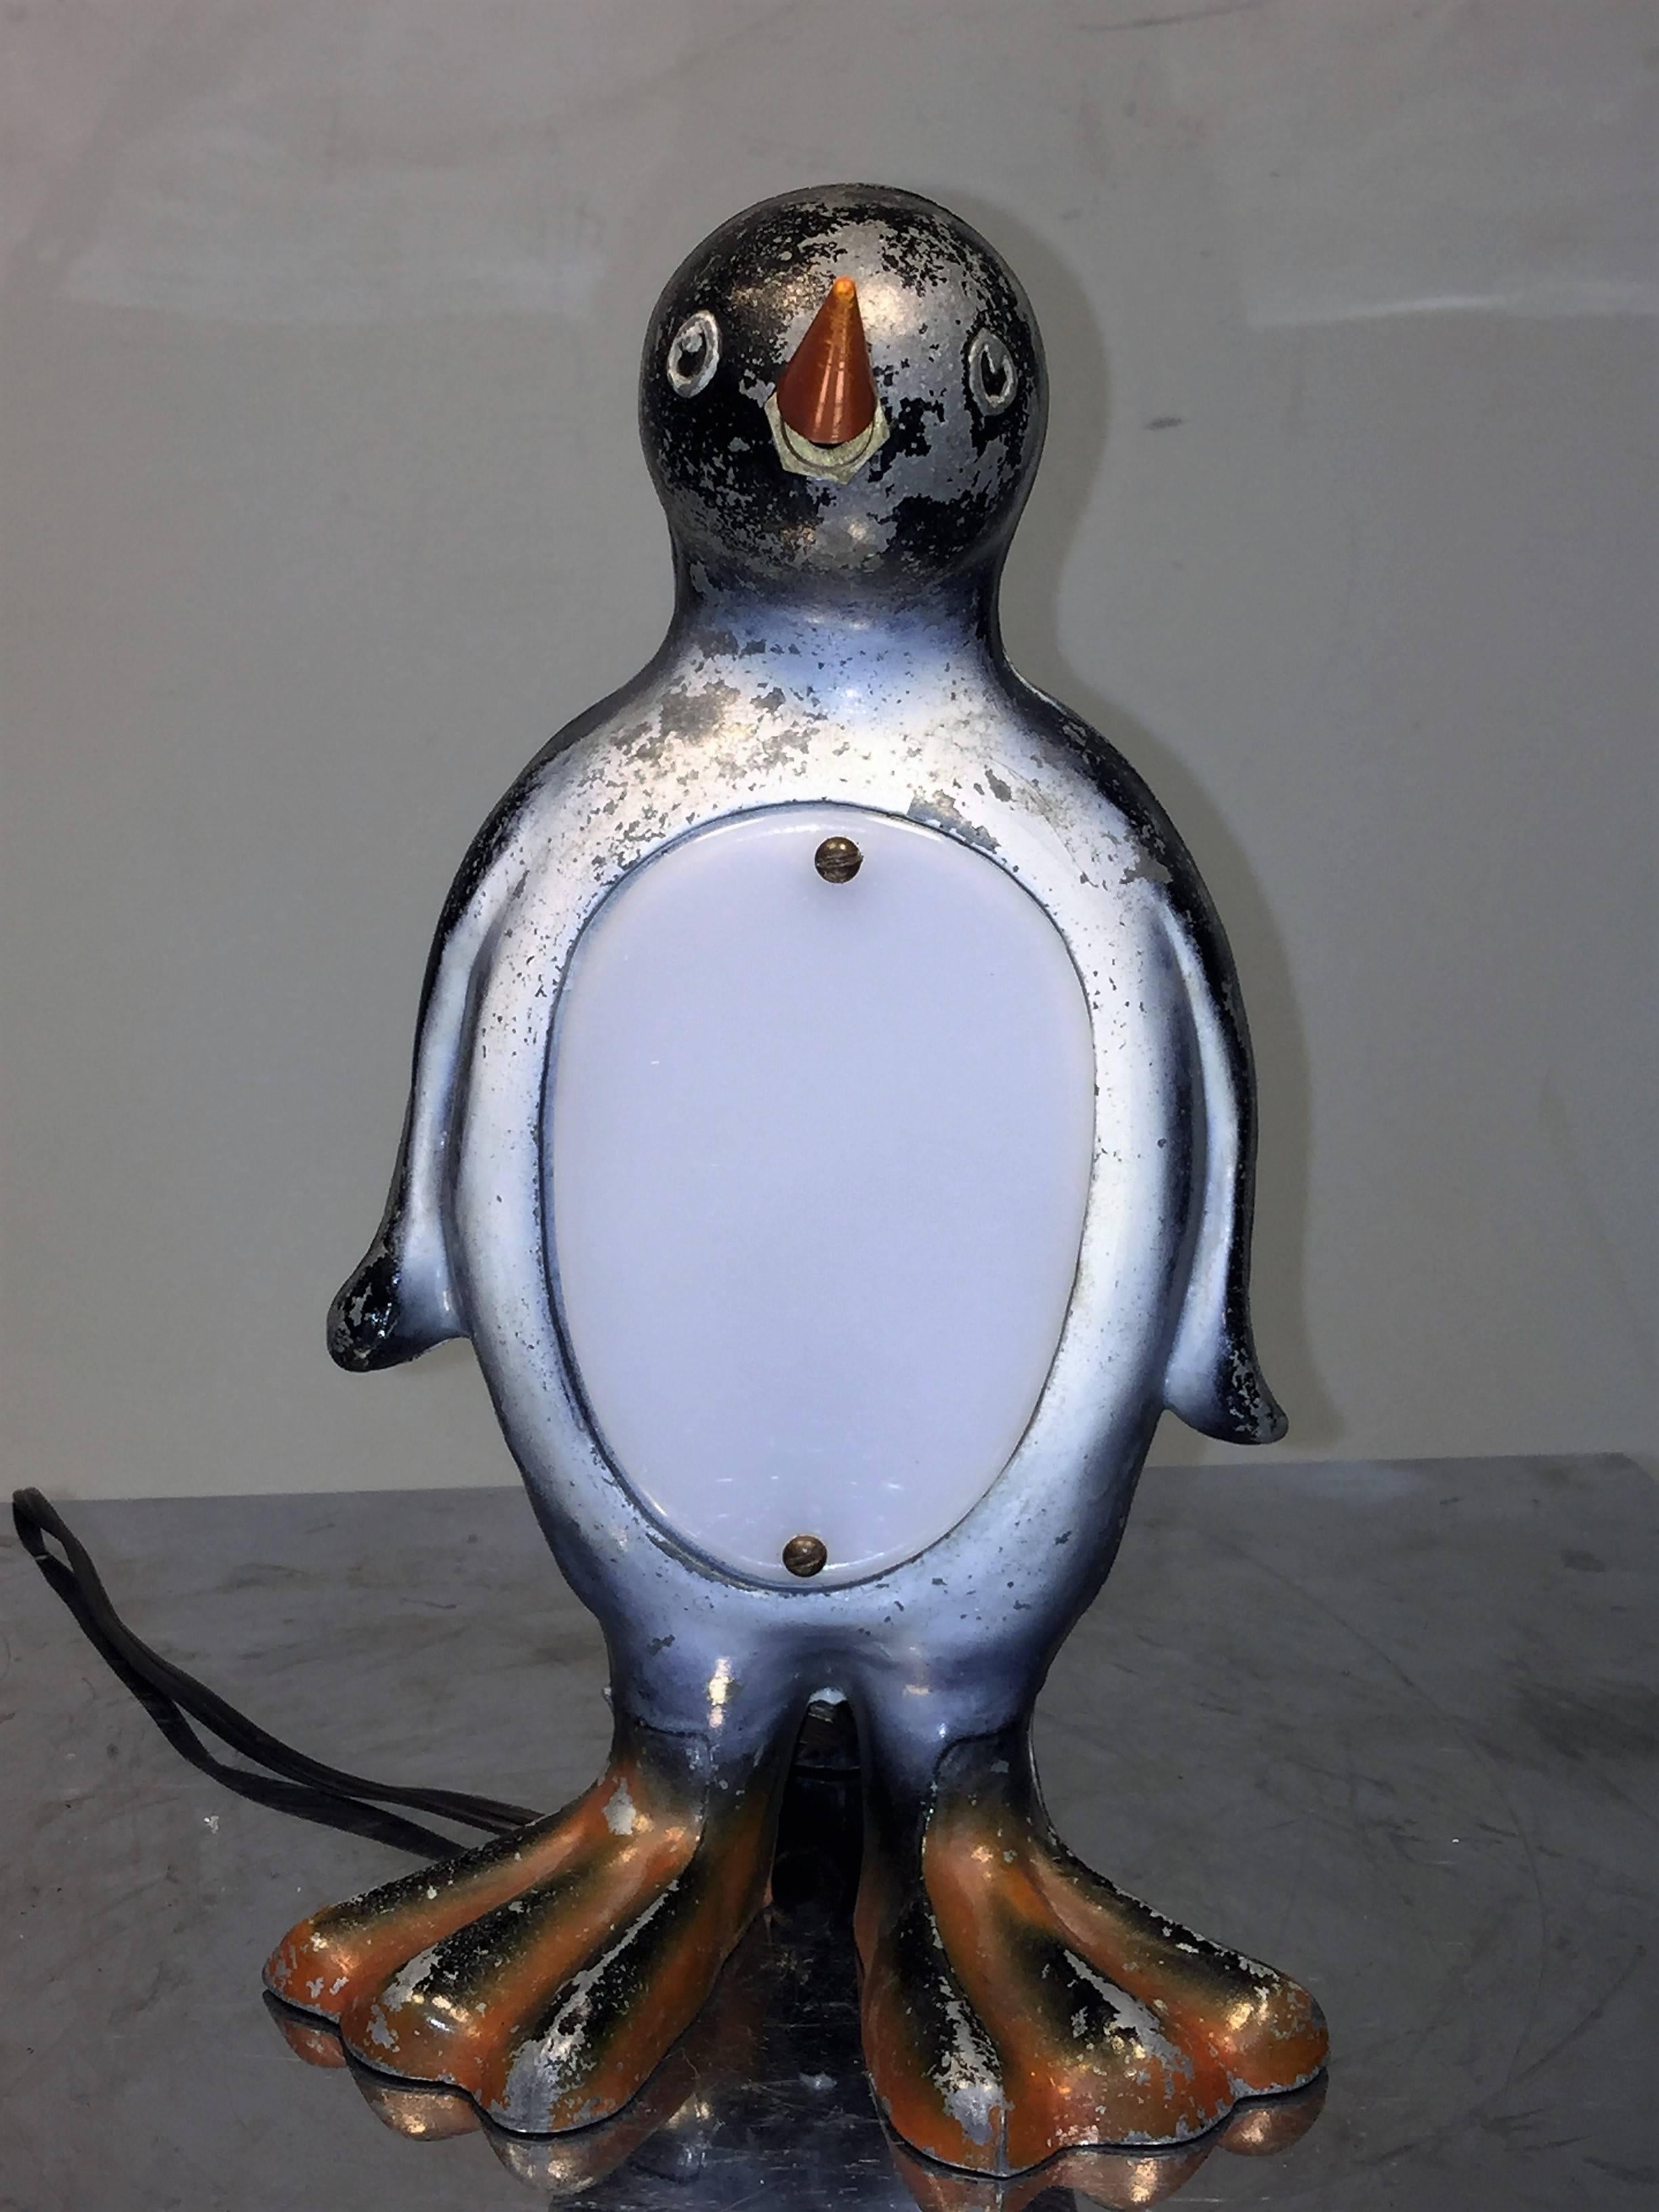 Ingenious design cast polychromed black and white metal penguin lamp with white Lucite chest and orange bakelite beak on/off switch. Created in the 1930s this great accent lamp would be a soothing night light on your bedroom nightstand. To change